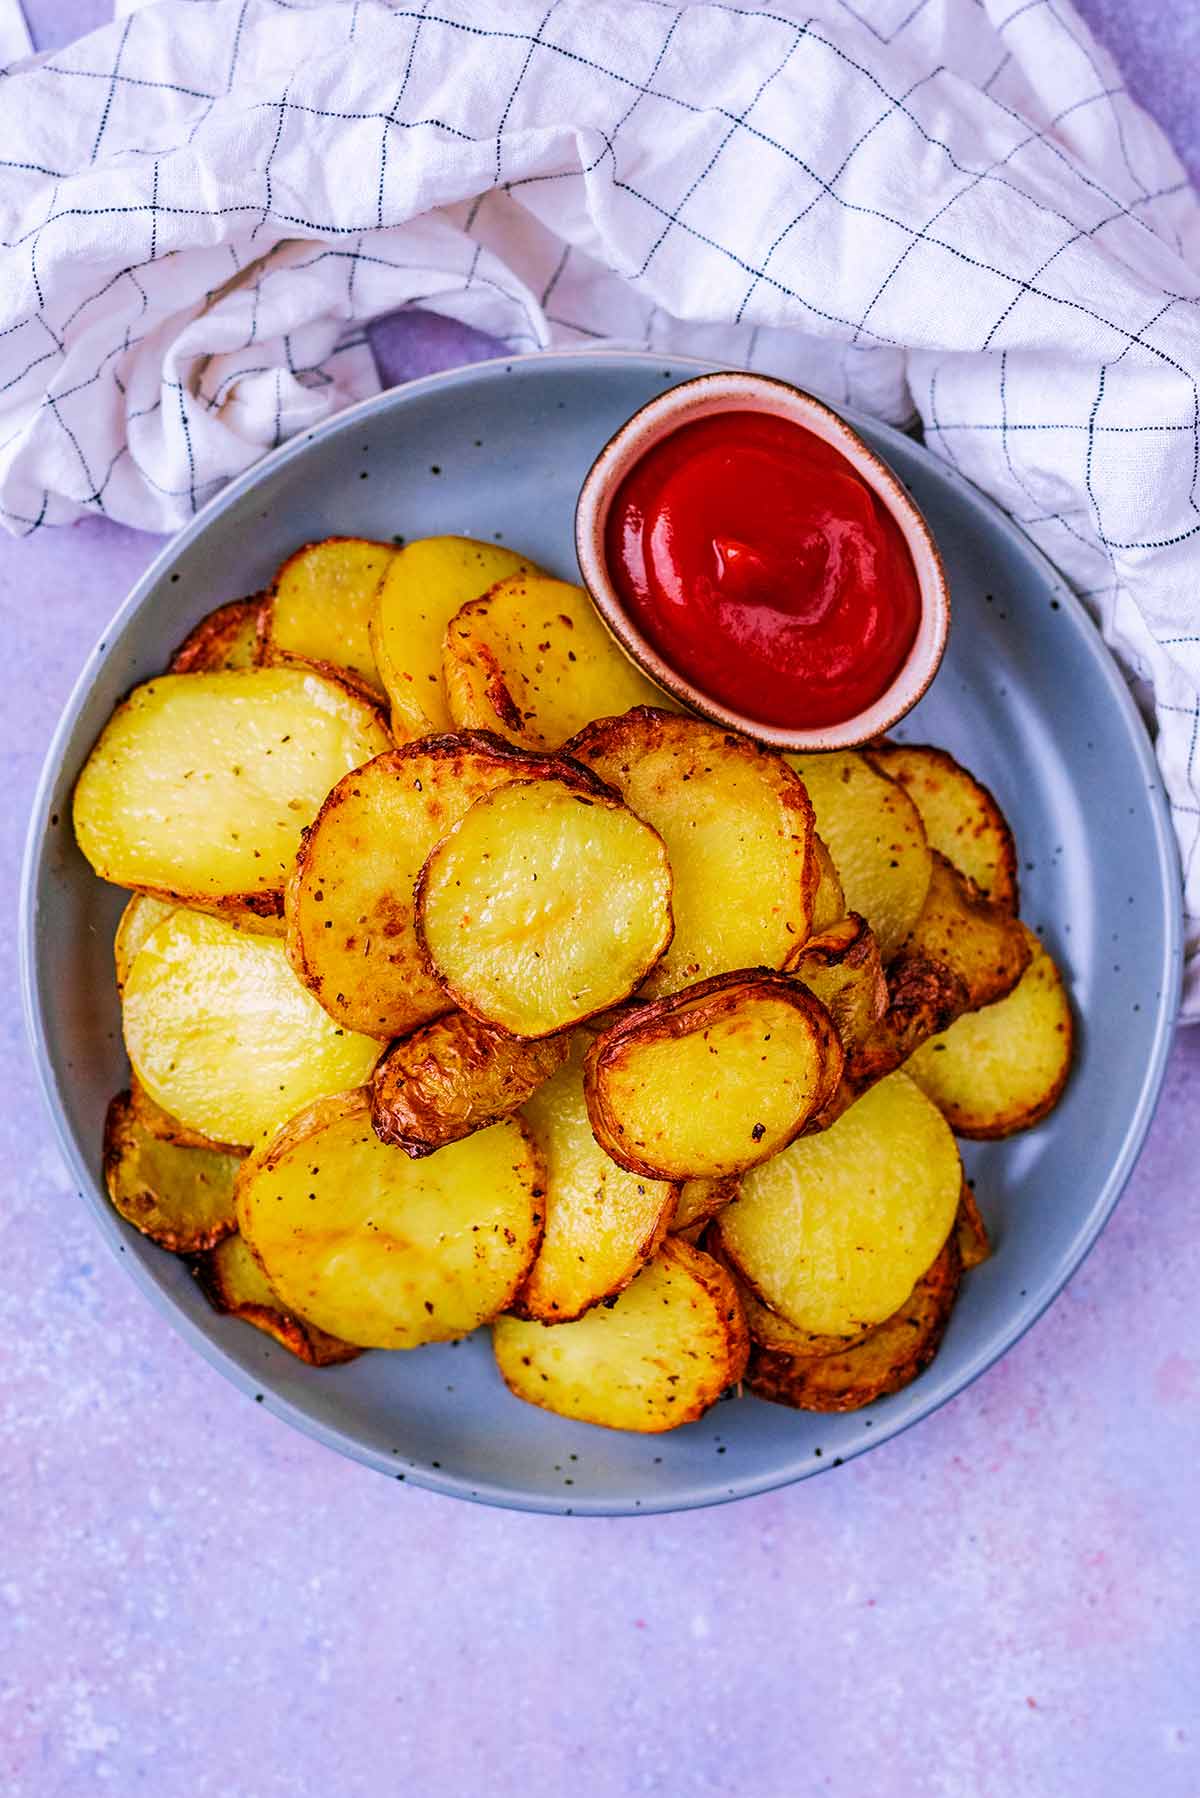 A plate of cooked sliced potatoes with some ketchup.